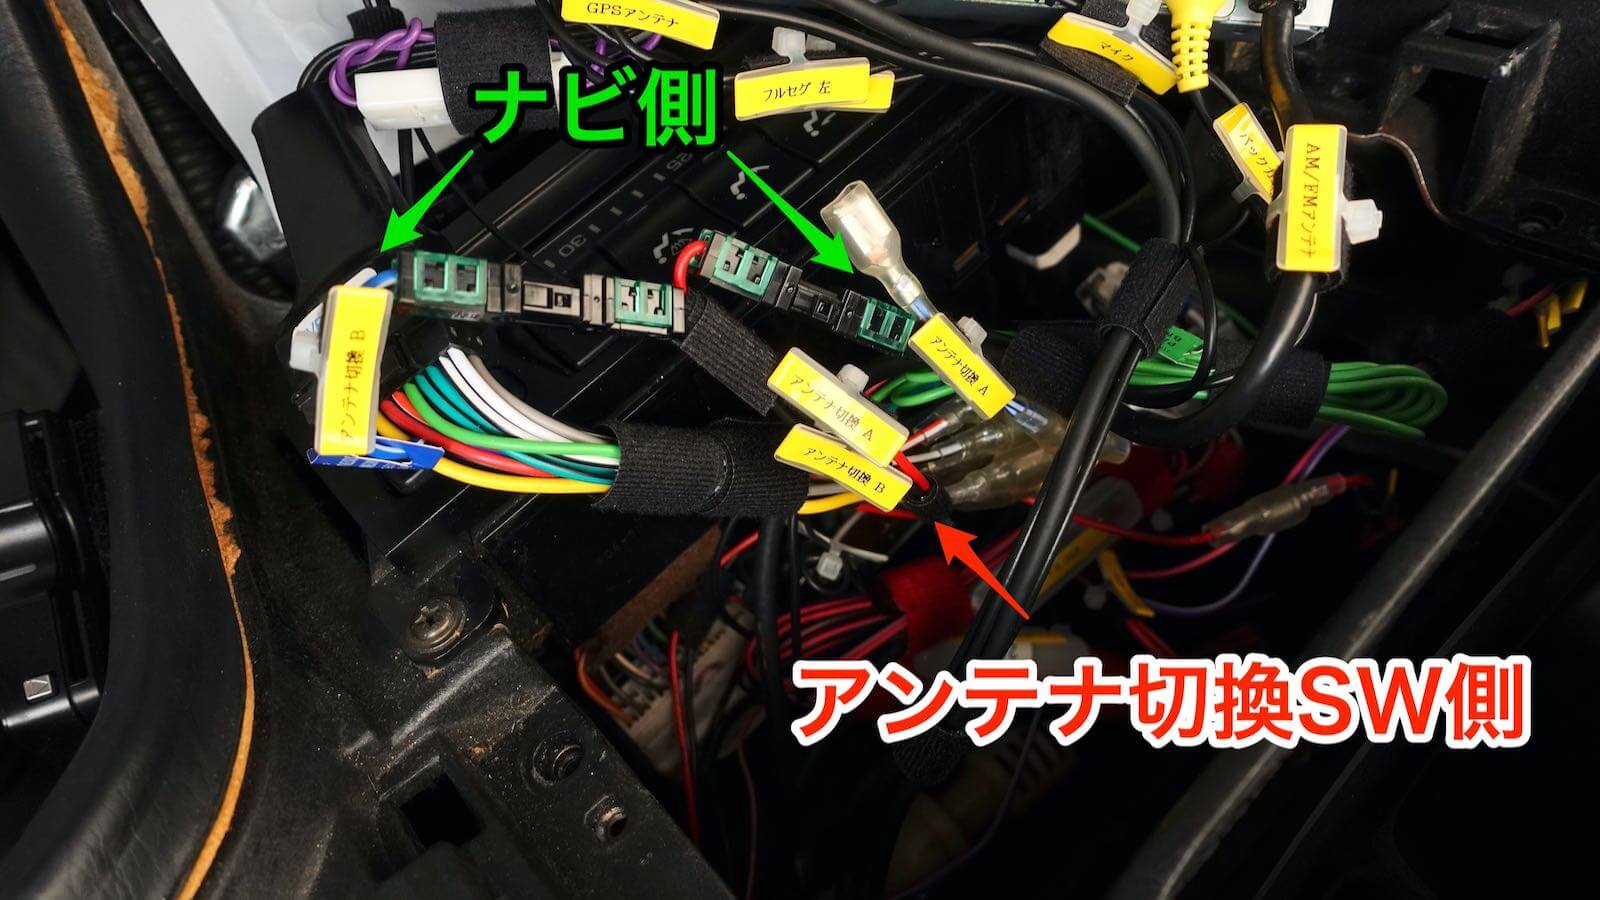 MR2 antenna control connection